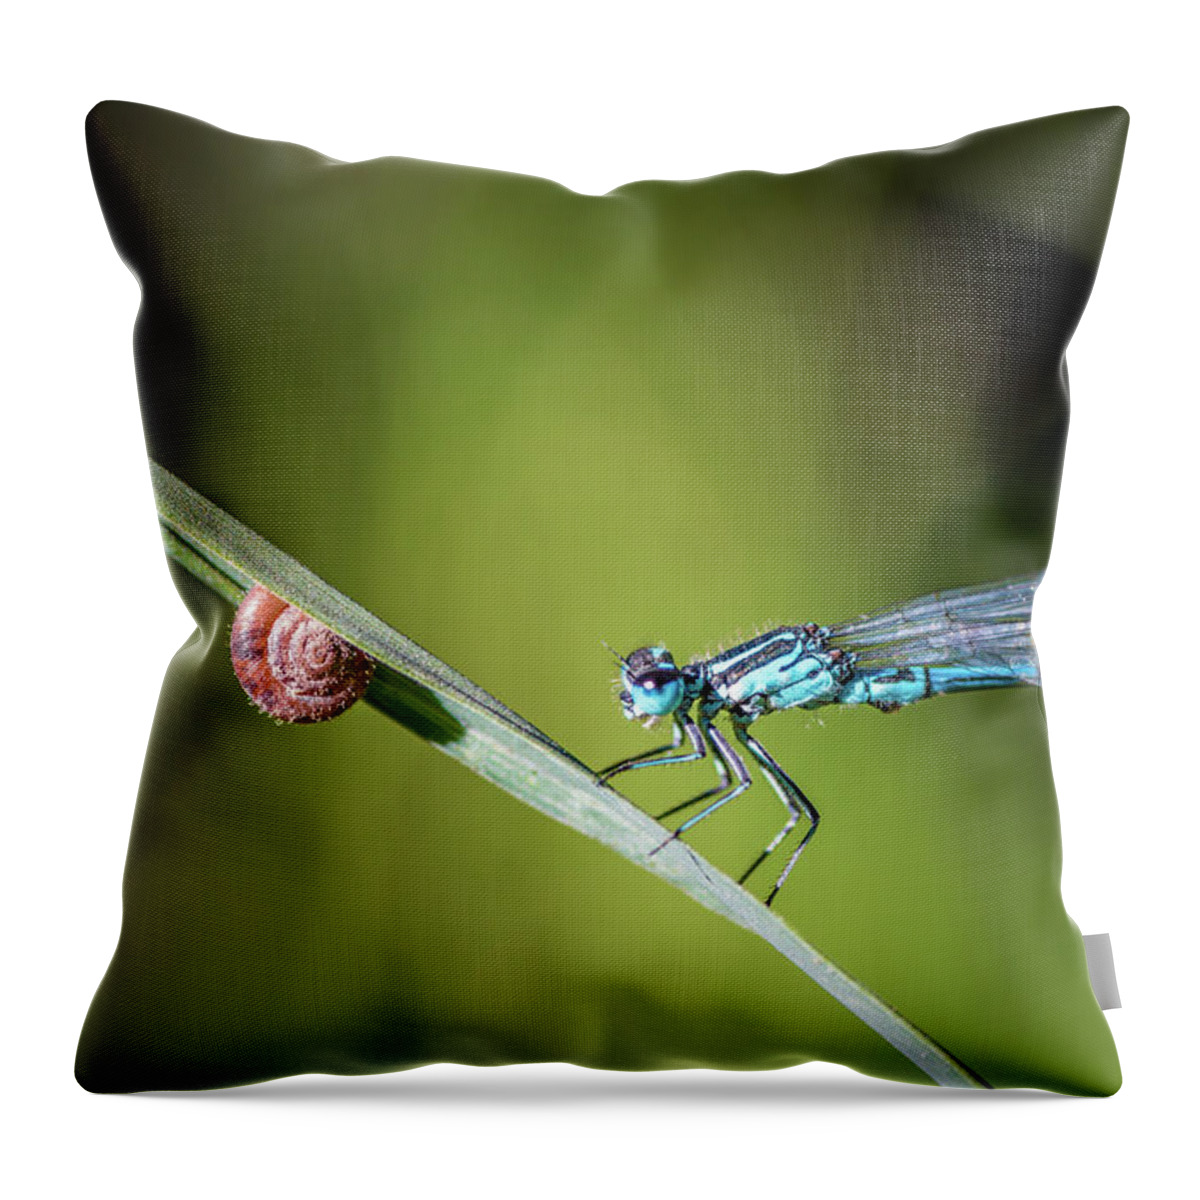 Dragonfly Throw Pillow featuring the photograph Blue Dragonfly insect perched on herb with small snail by Gregory DUBUS